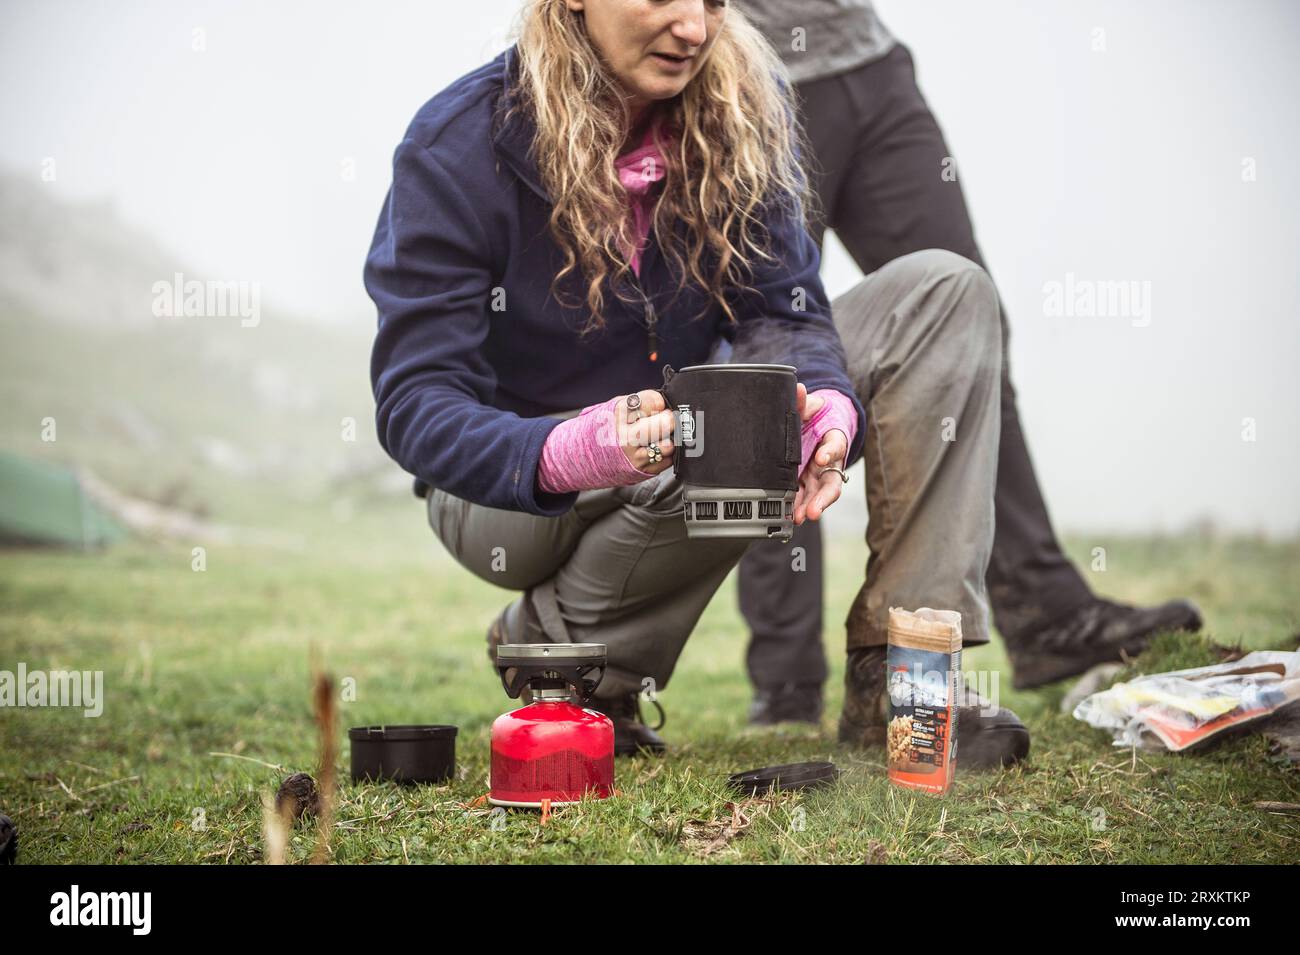 Young woman cooking at camp with portable stove Stock Photo